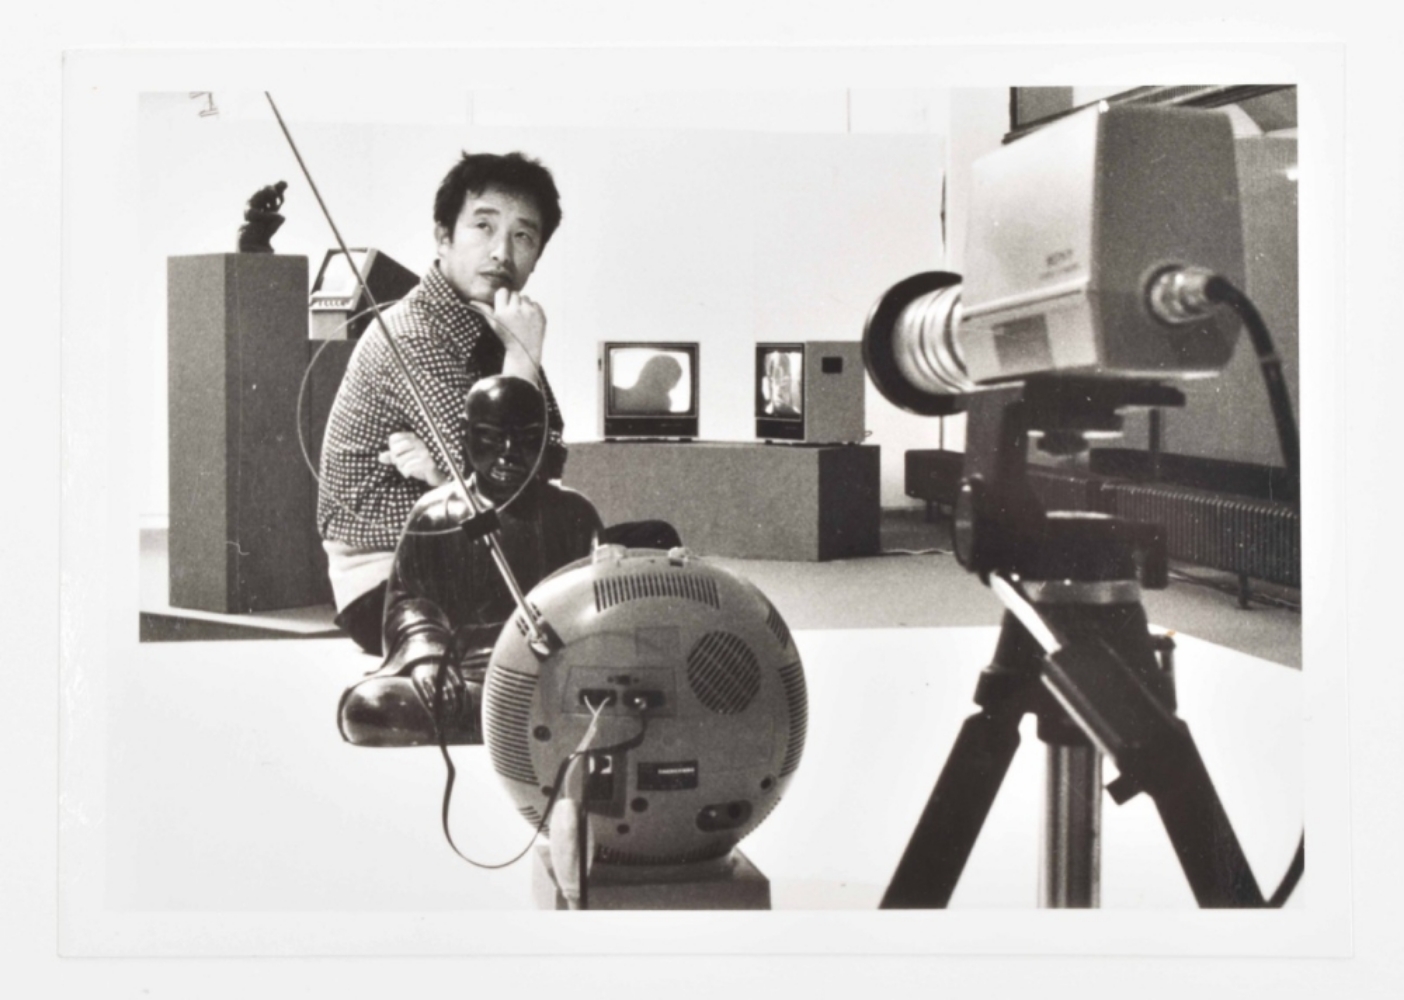 Nam June Paik ephemera from the collection of Dorine Mignot and Wim Beeren - Image 4 of 9